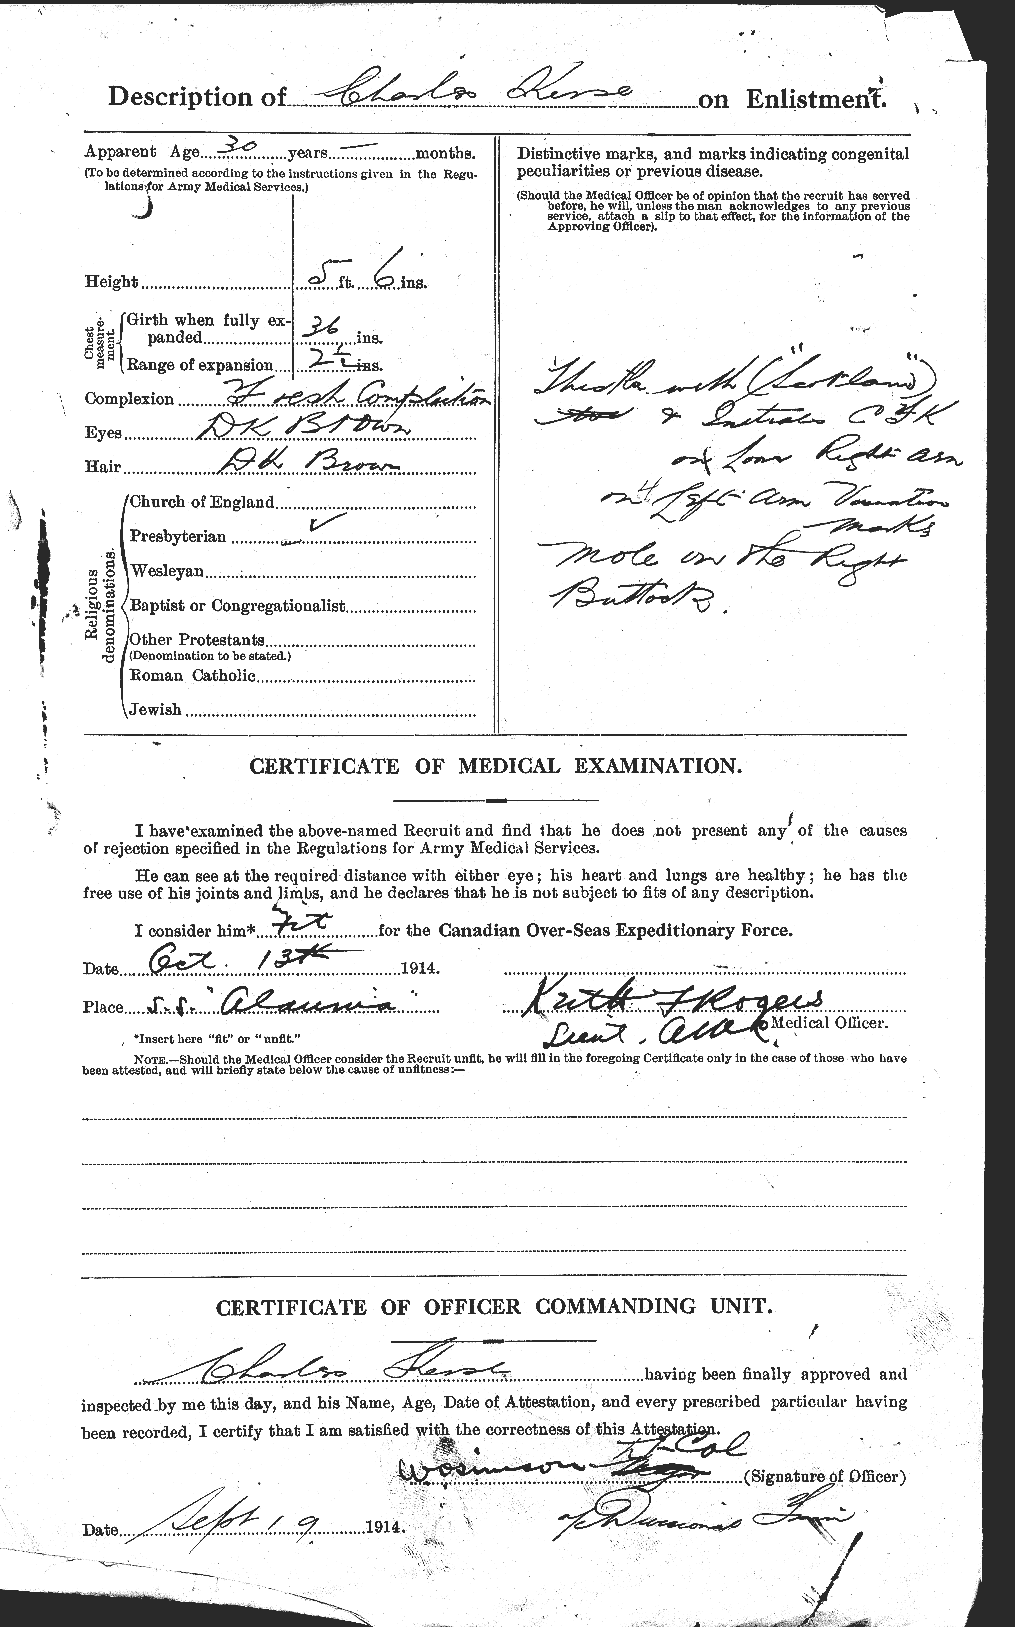 Personnel Records of the First World War - CEF 432377b